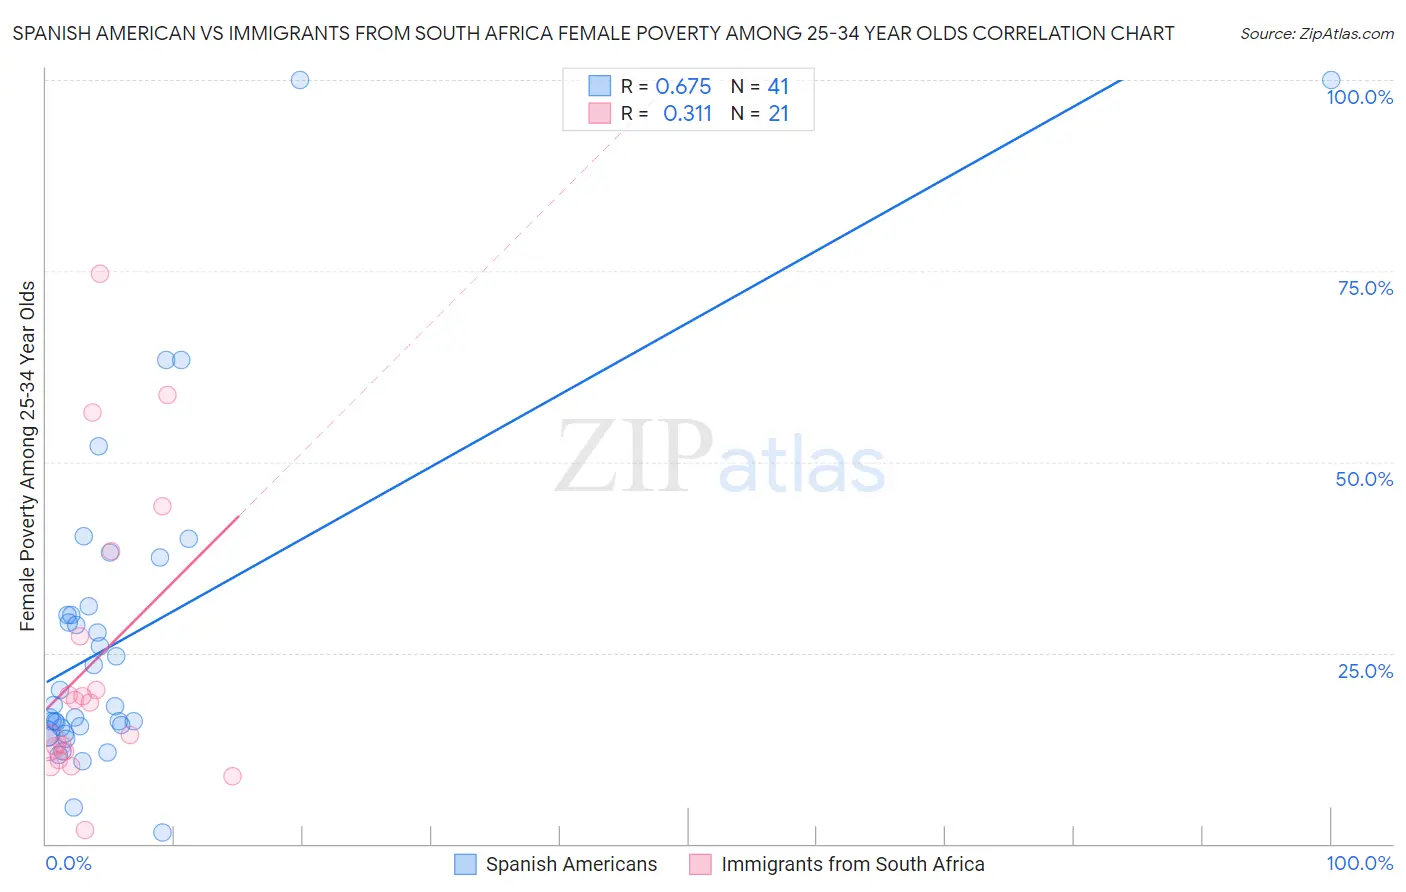 Spanish American vs Immigrants from South Africa Female Poverty Among 25-34 Year Olds